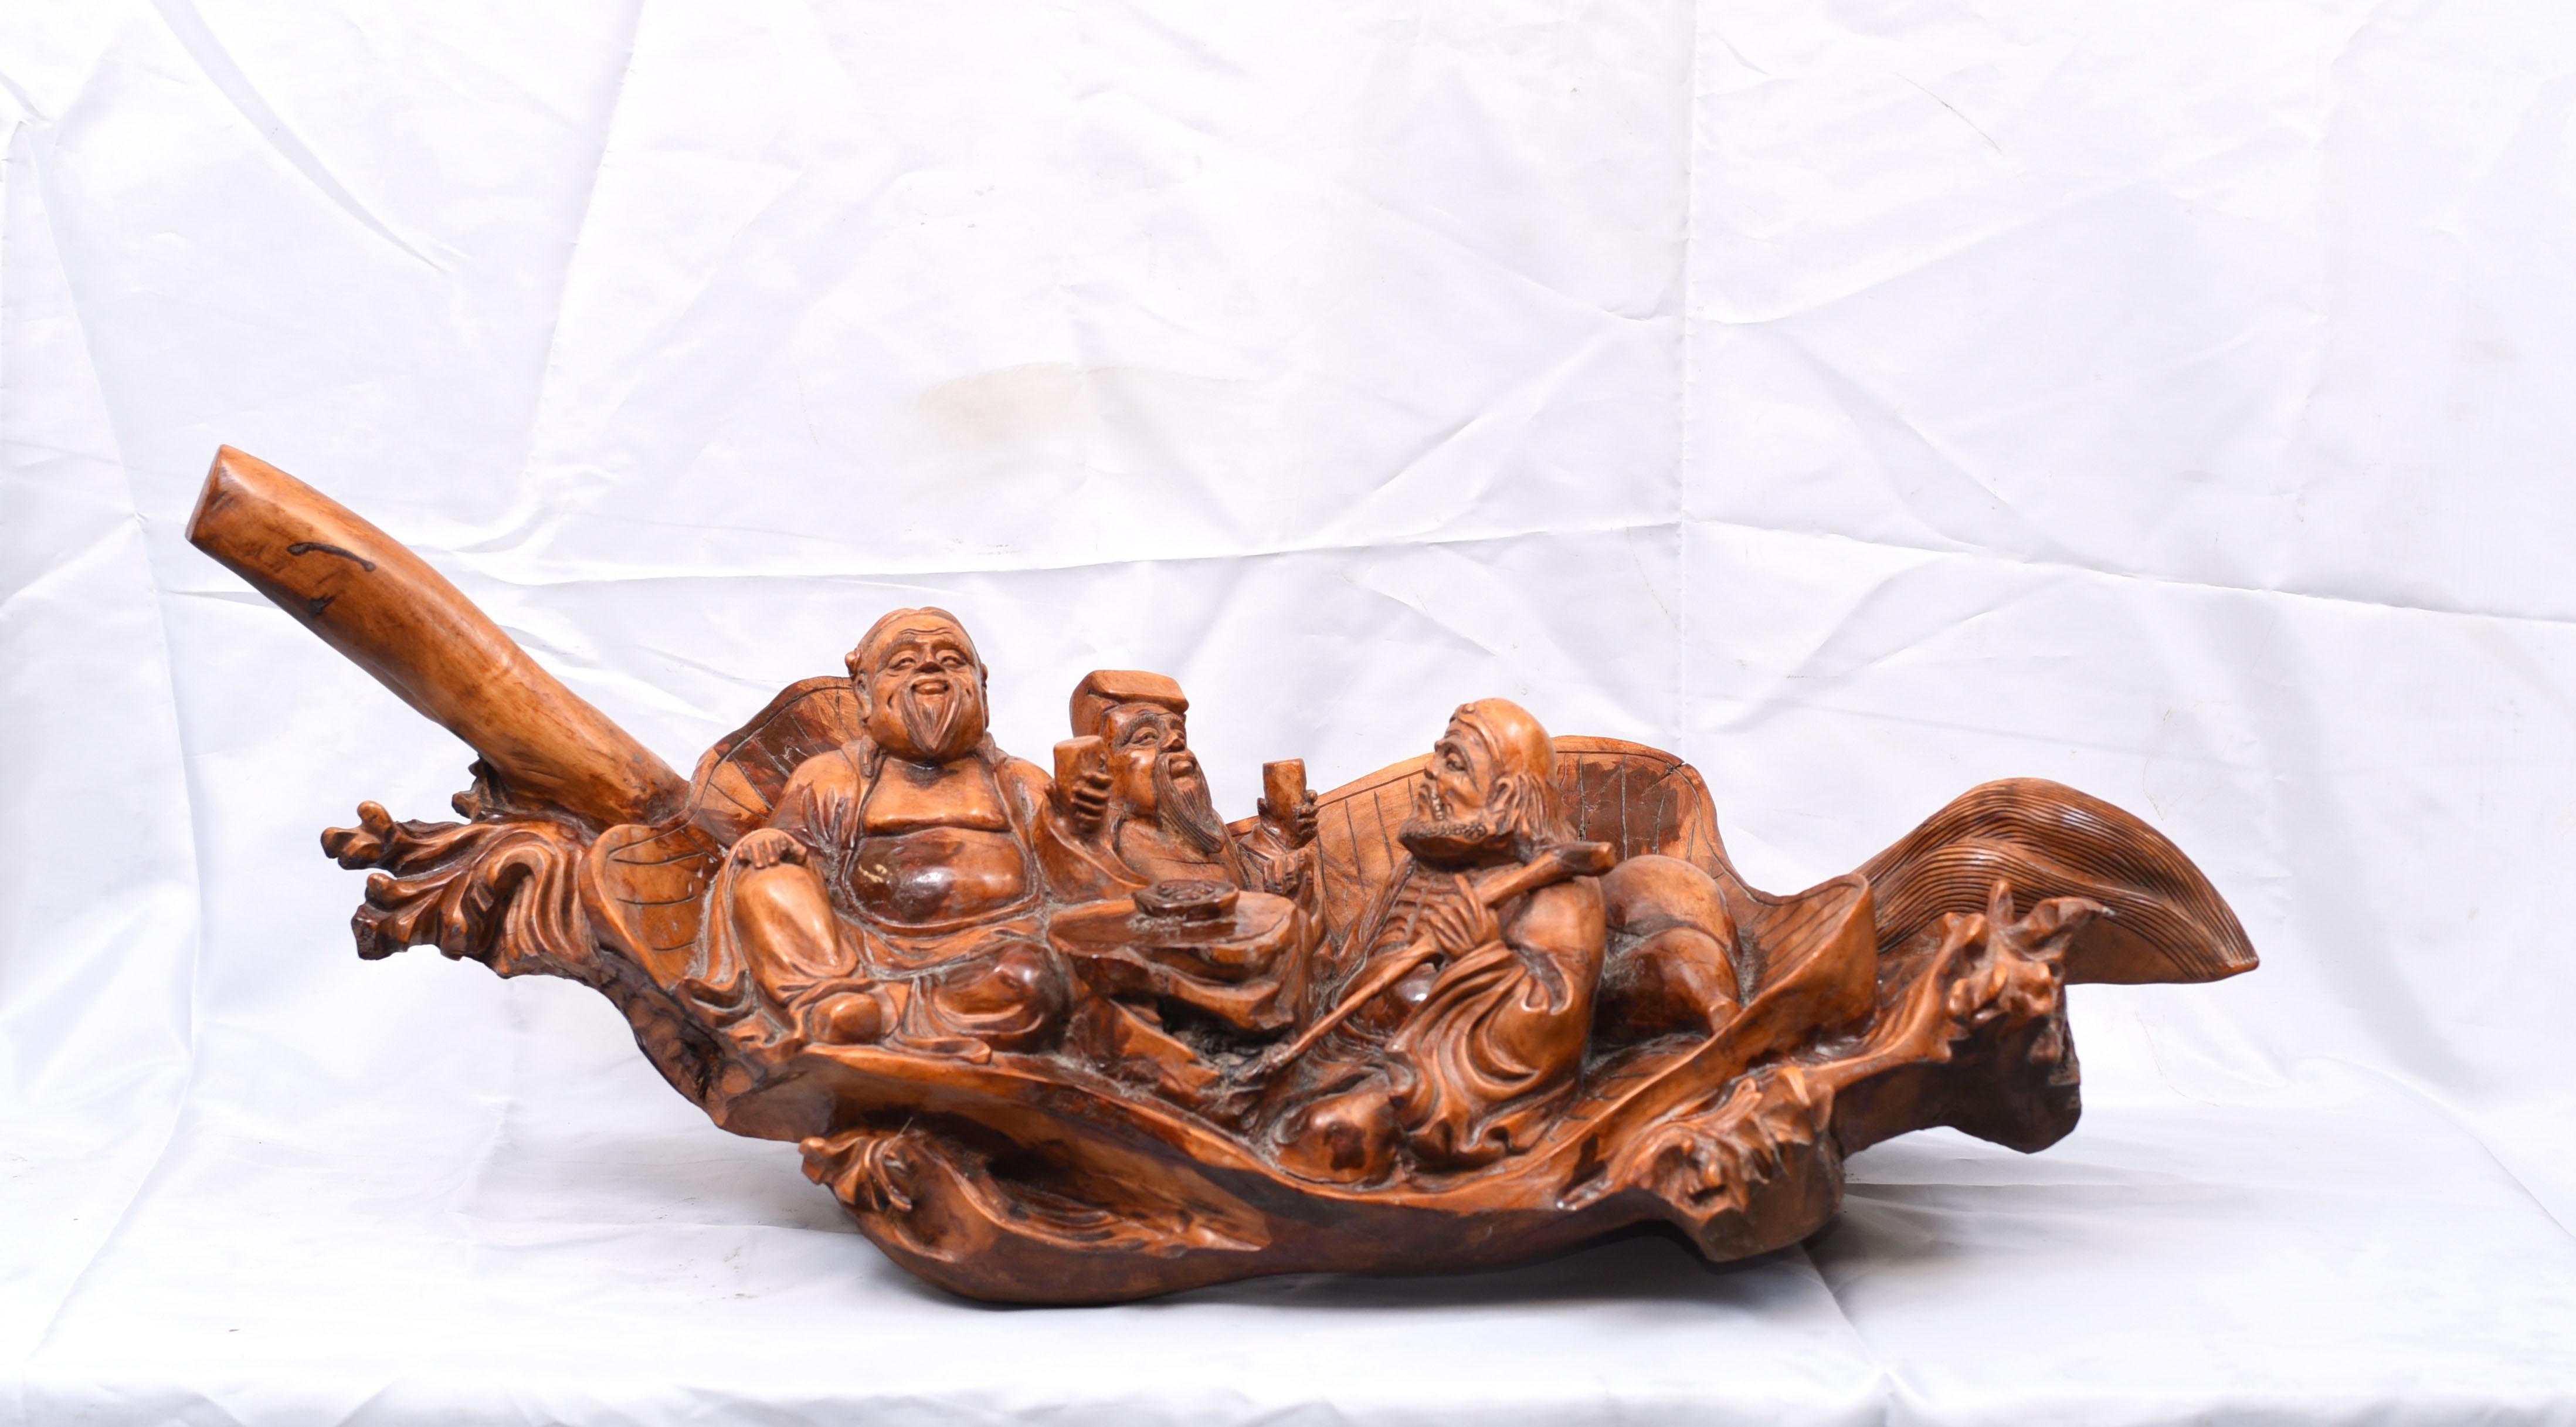 Carved Chinese Wise Men Statue Circa 1900, Hardwood Boat Figurine 6